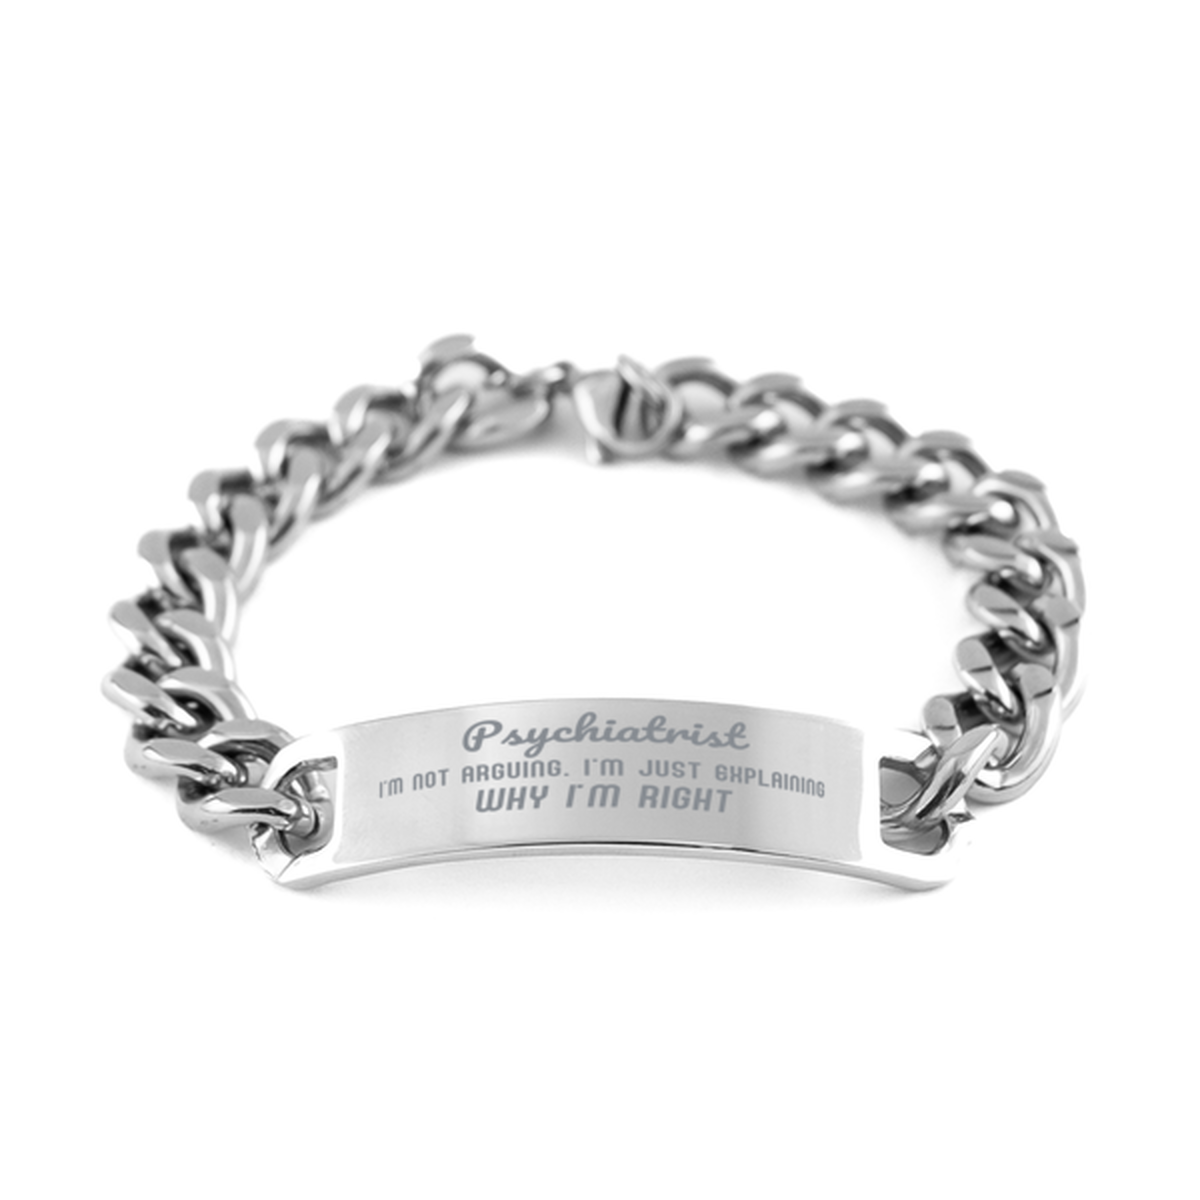 Psychiatrist I'm not Arguing. I'm Just Explaining Why I'm RIGHT Cuban Chain Stainless Steel Bracelet, Graduation Birthday Christmas Psychiatrist Gifts For Psychiatrist Funny Saying Quote Present for Men Women Coworker